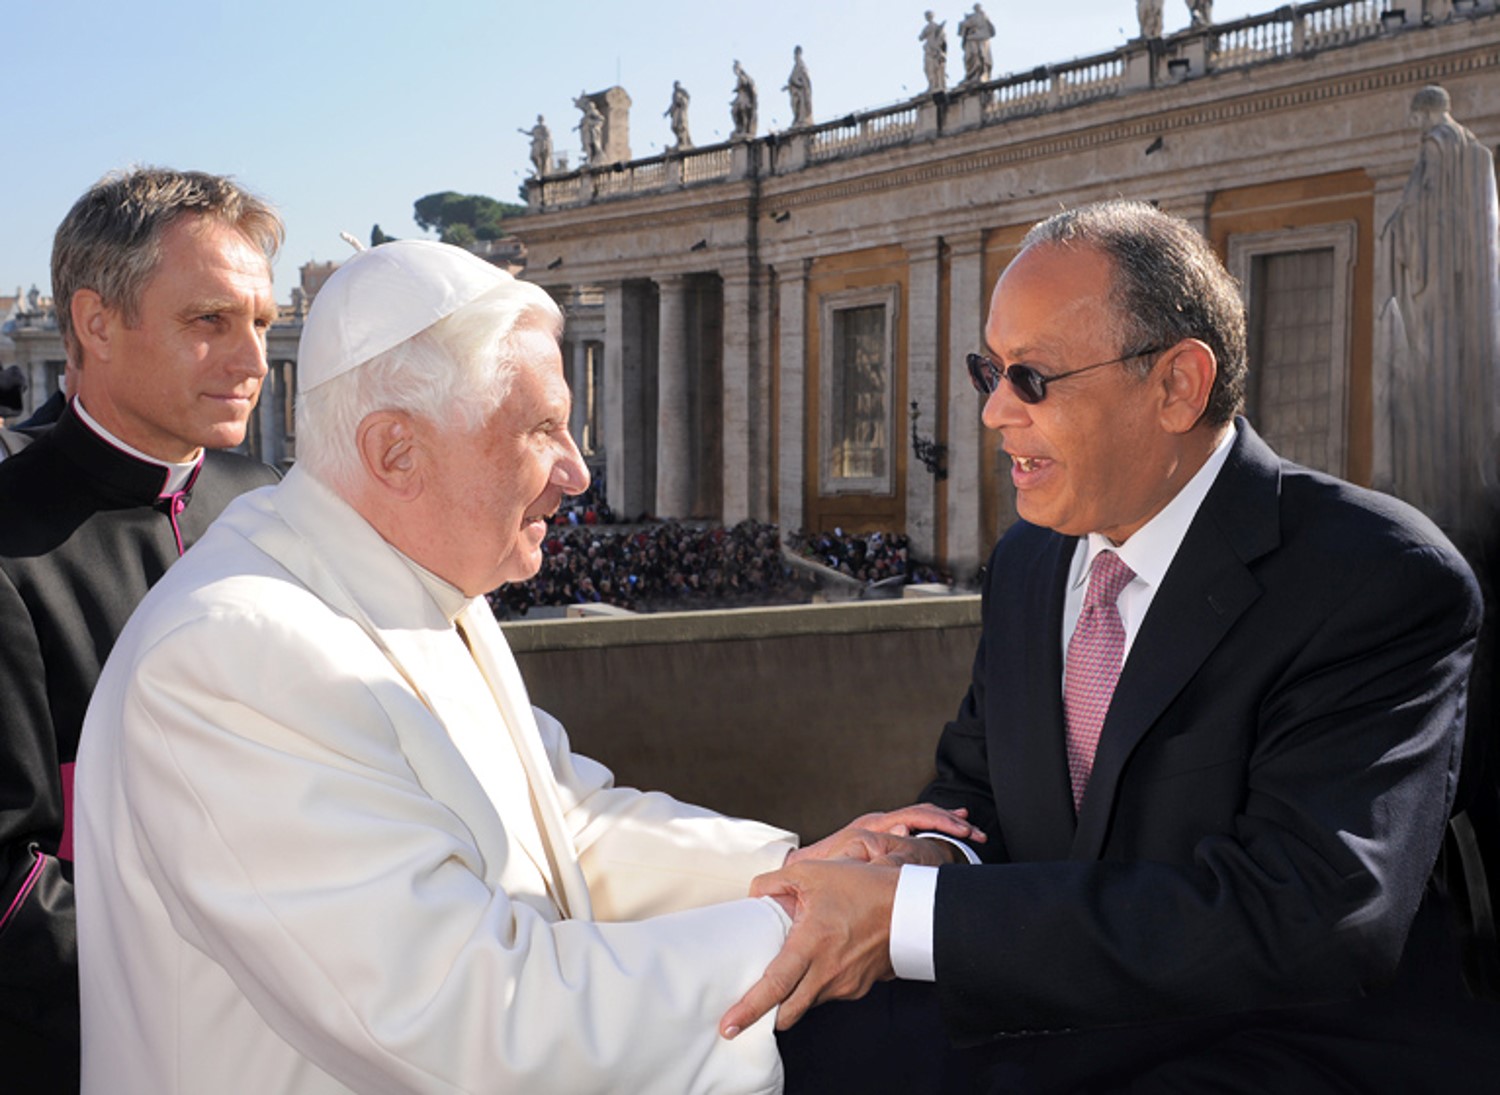 Meeting with Pope Benedict XVI at the Vatican as part of President Bush’s initiative to promote interfaith and intrafaith dialogue as a means for advancing US foreign policy.